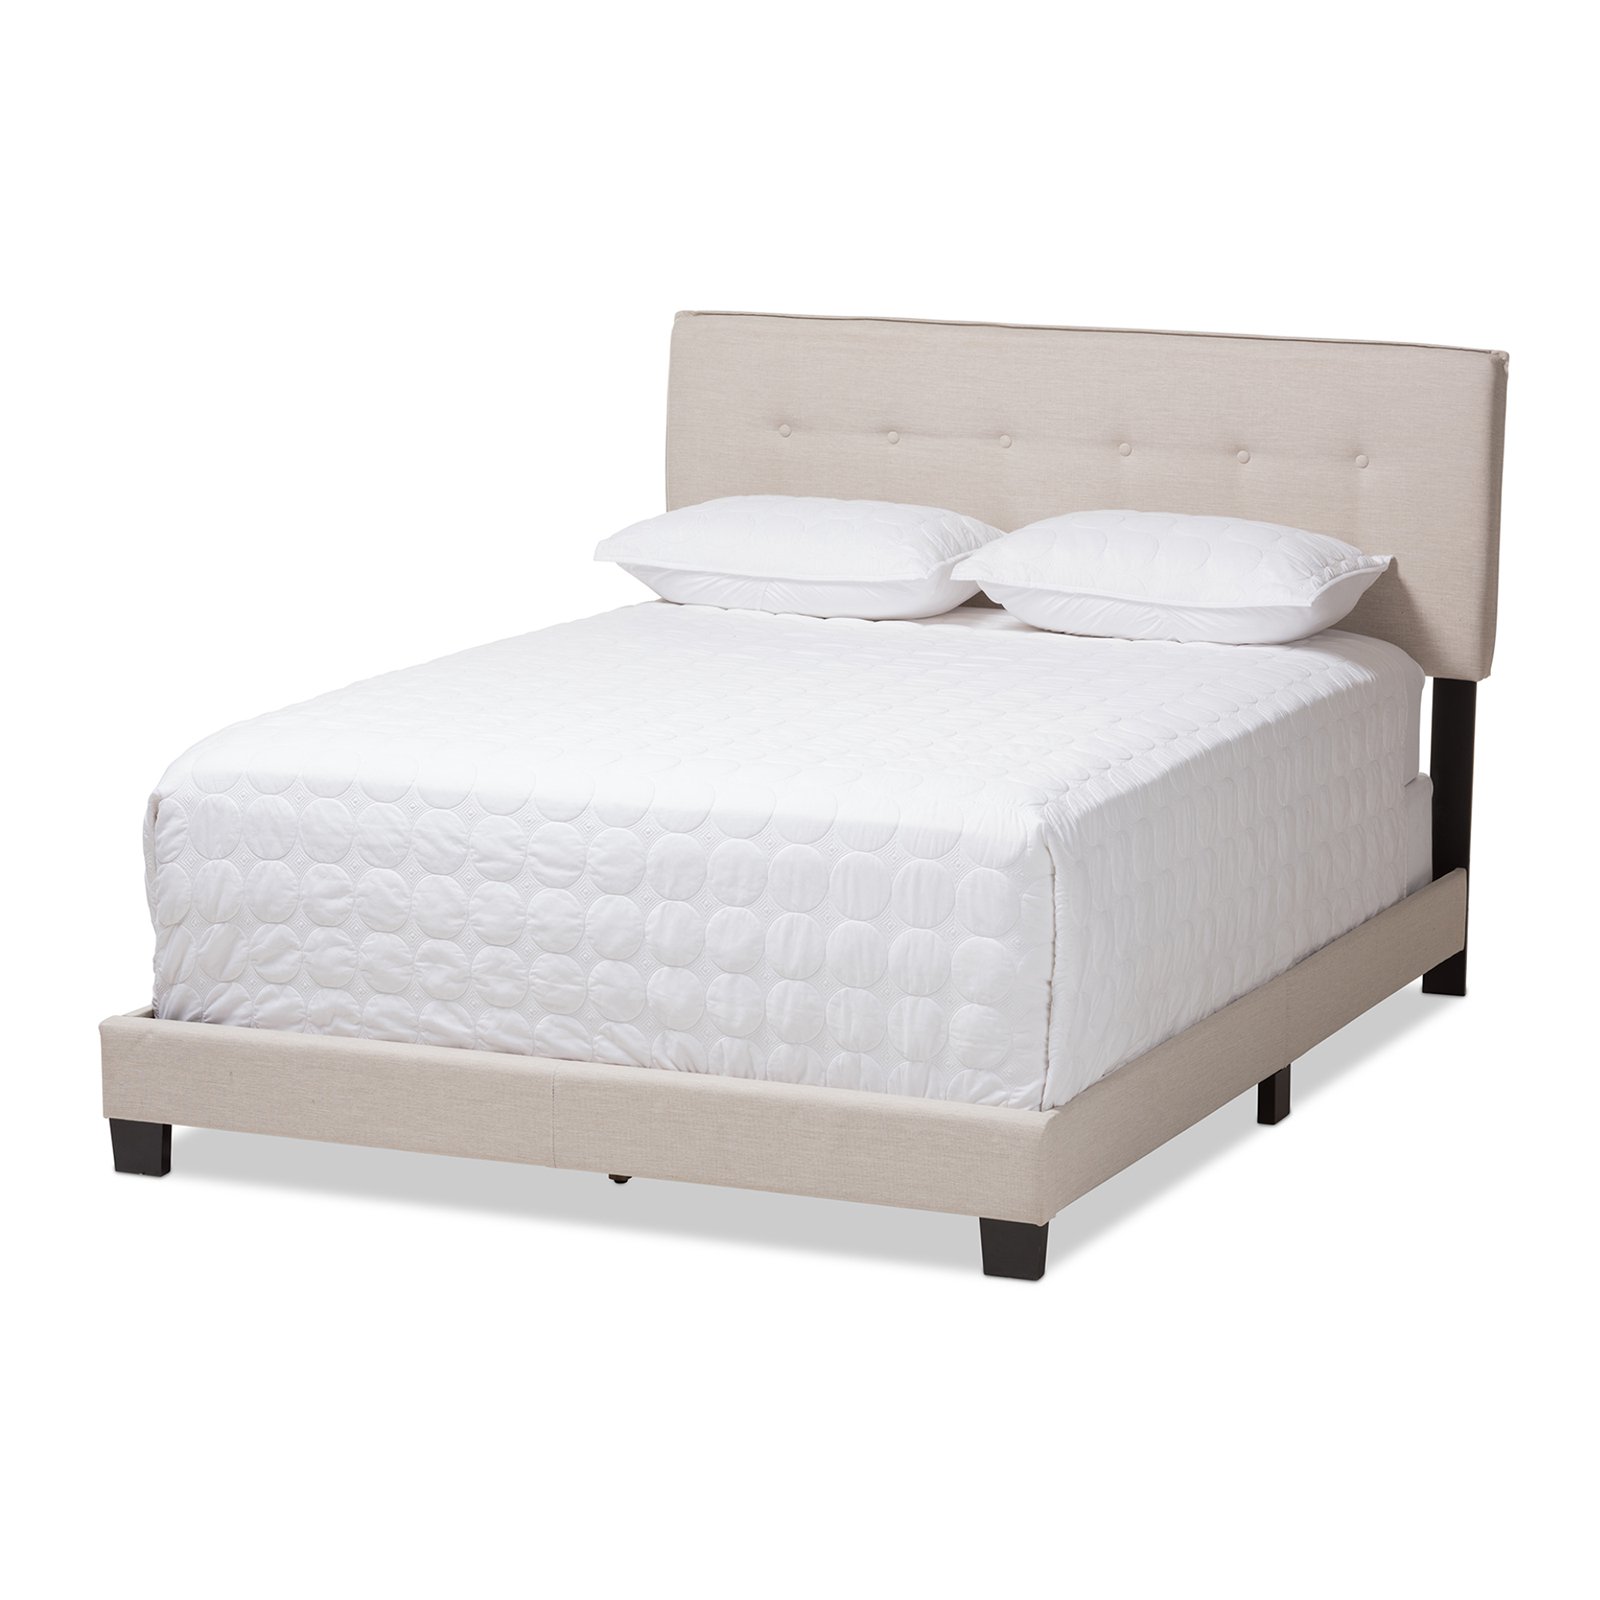 Baxton Studio Audrey Modern and Contemporary Upholstered Bed, Multiple Sizes, Multiple Colors - image 1 of 10